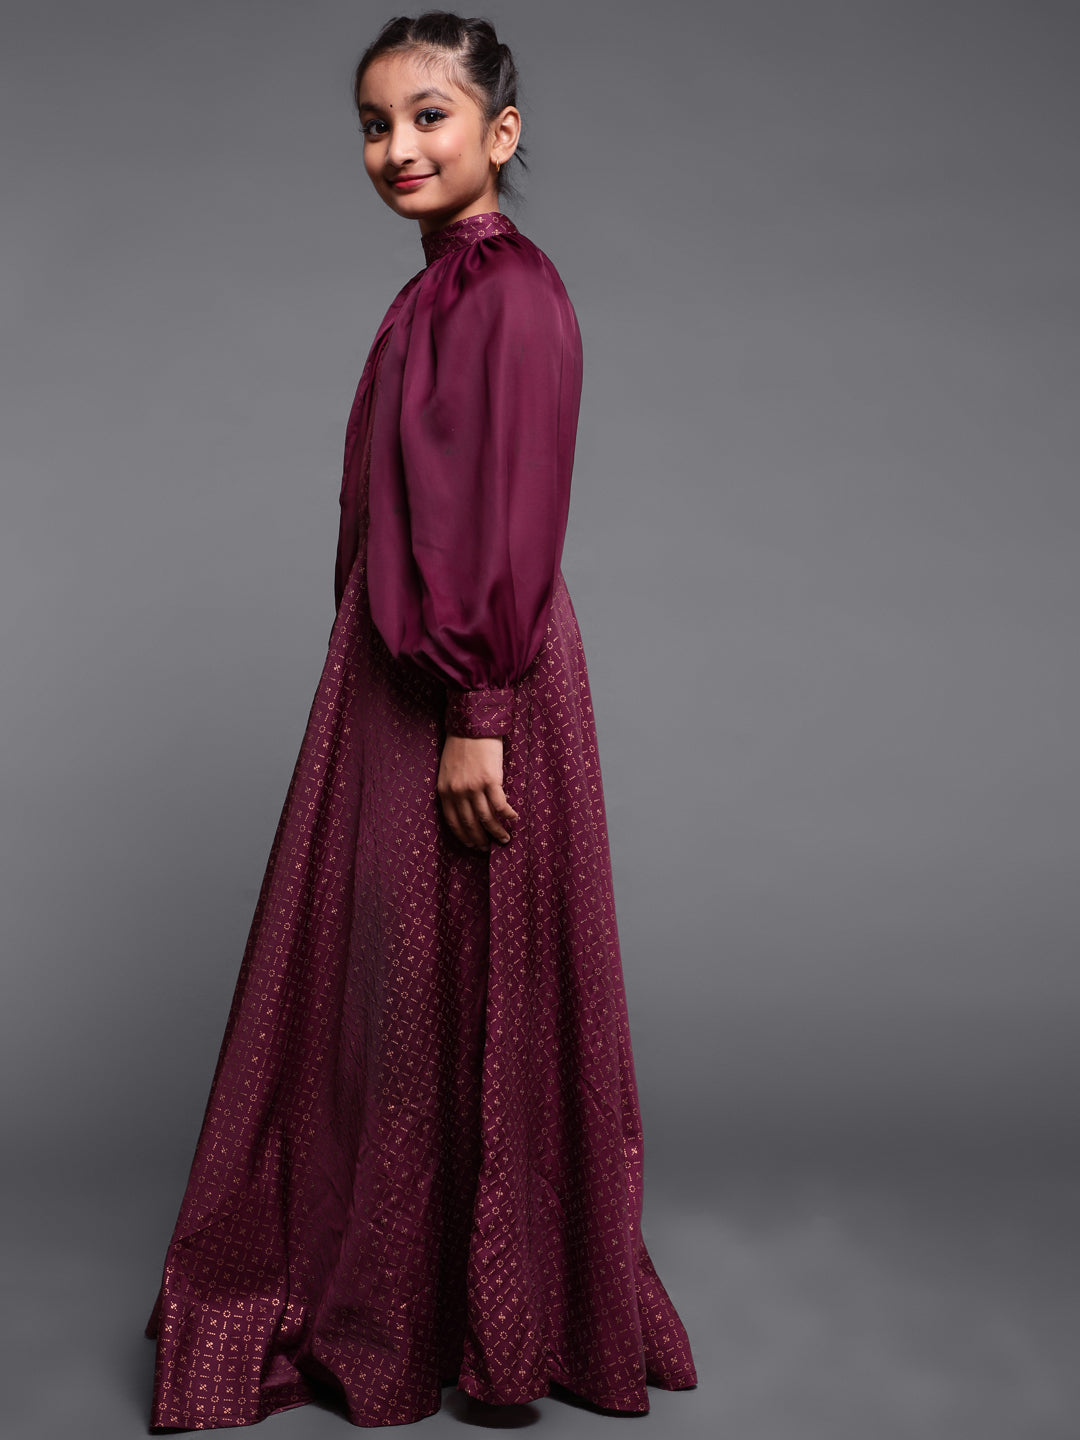 Burgundy Printed Flared Dress With Cape Sleeve